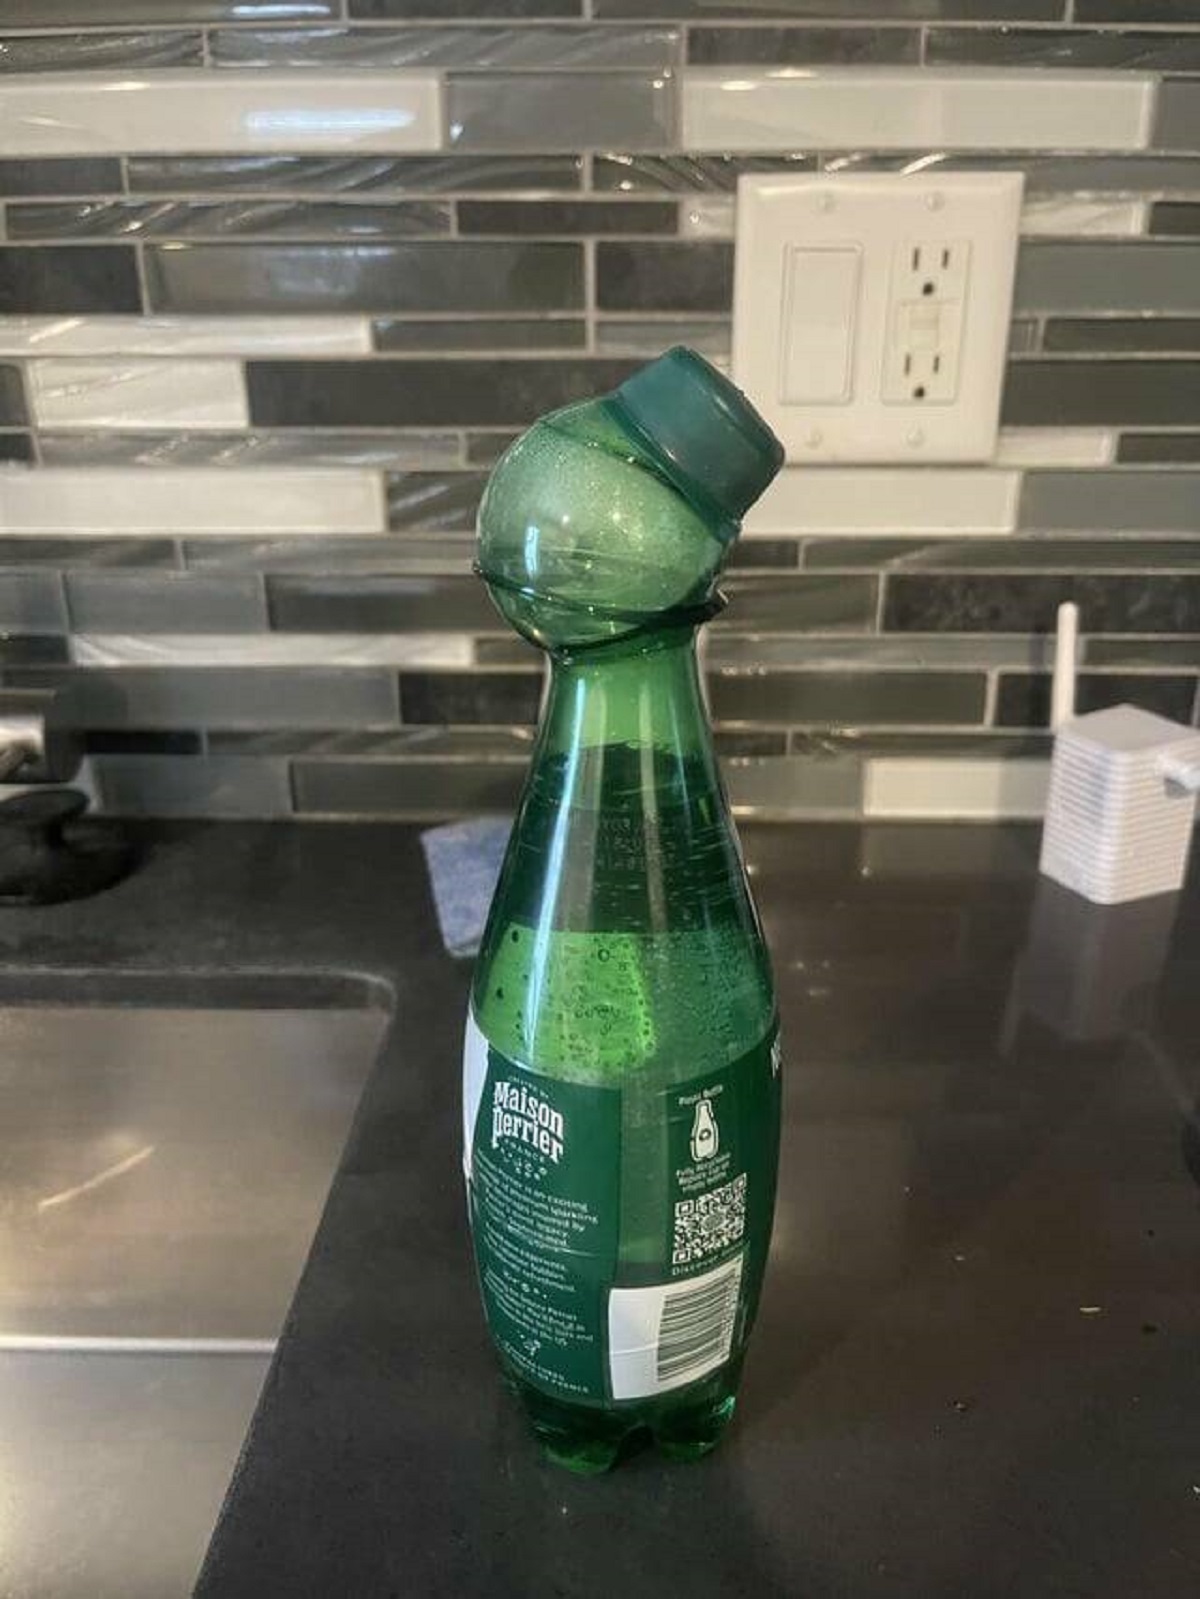 "This bottle of sparkling water I left in my truck all day"